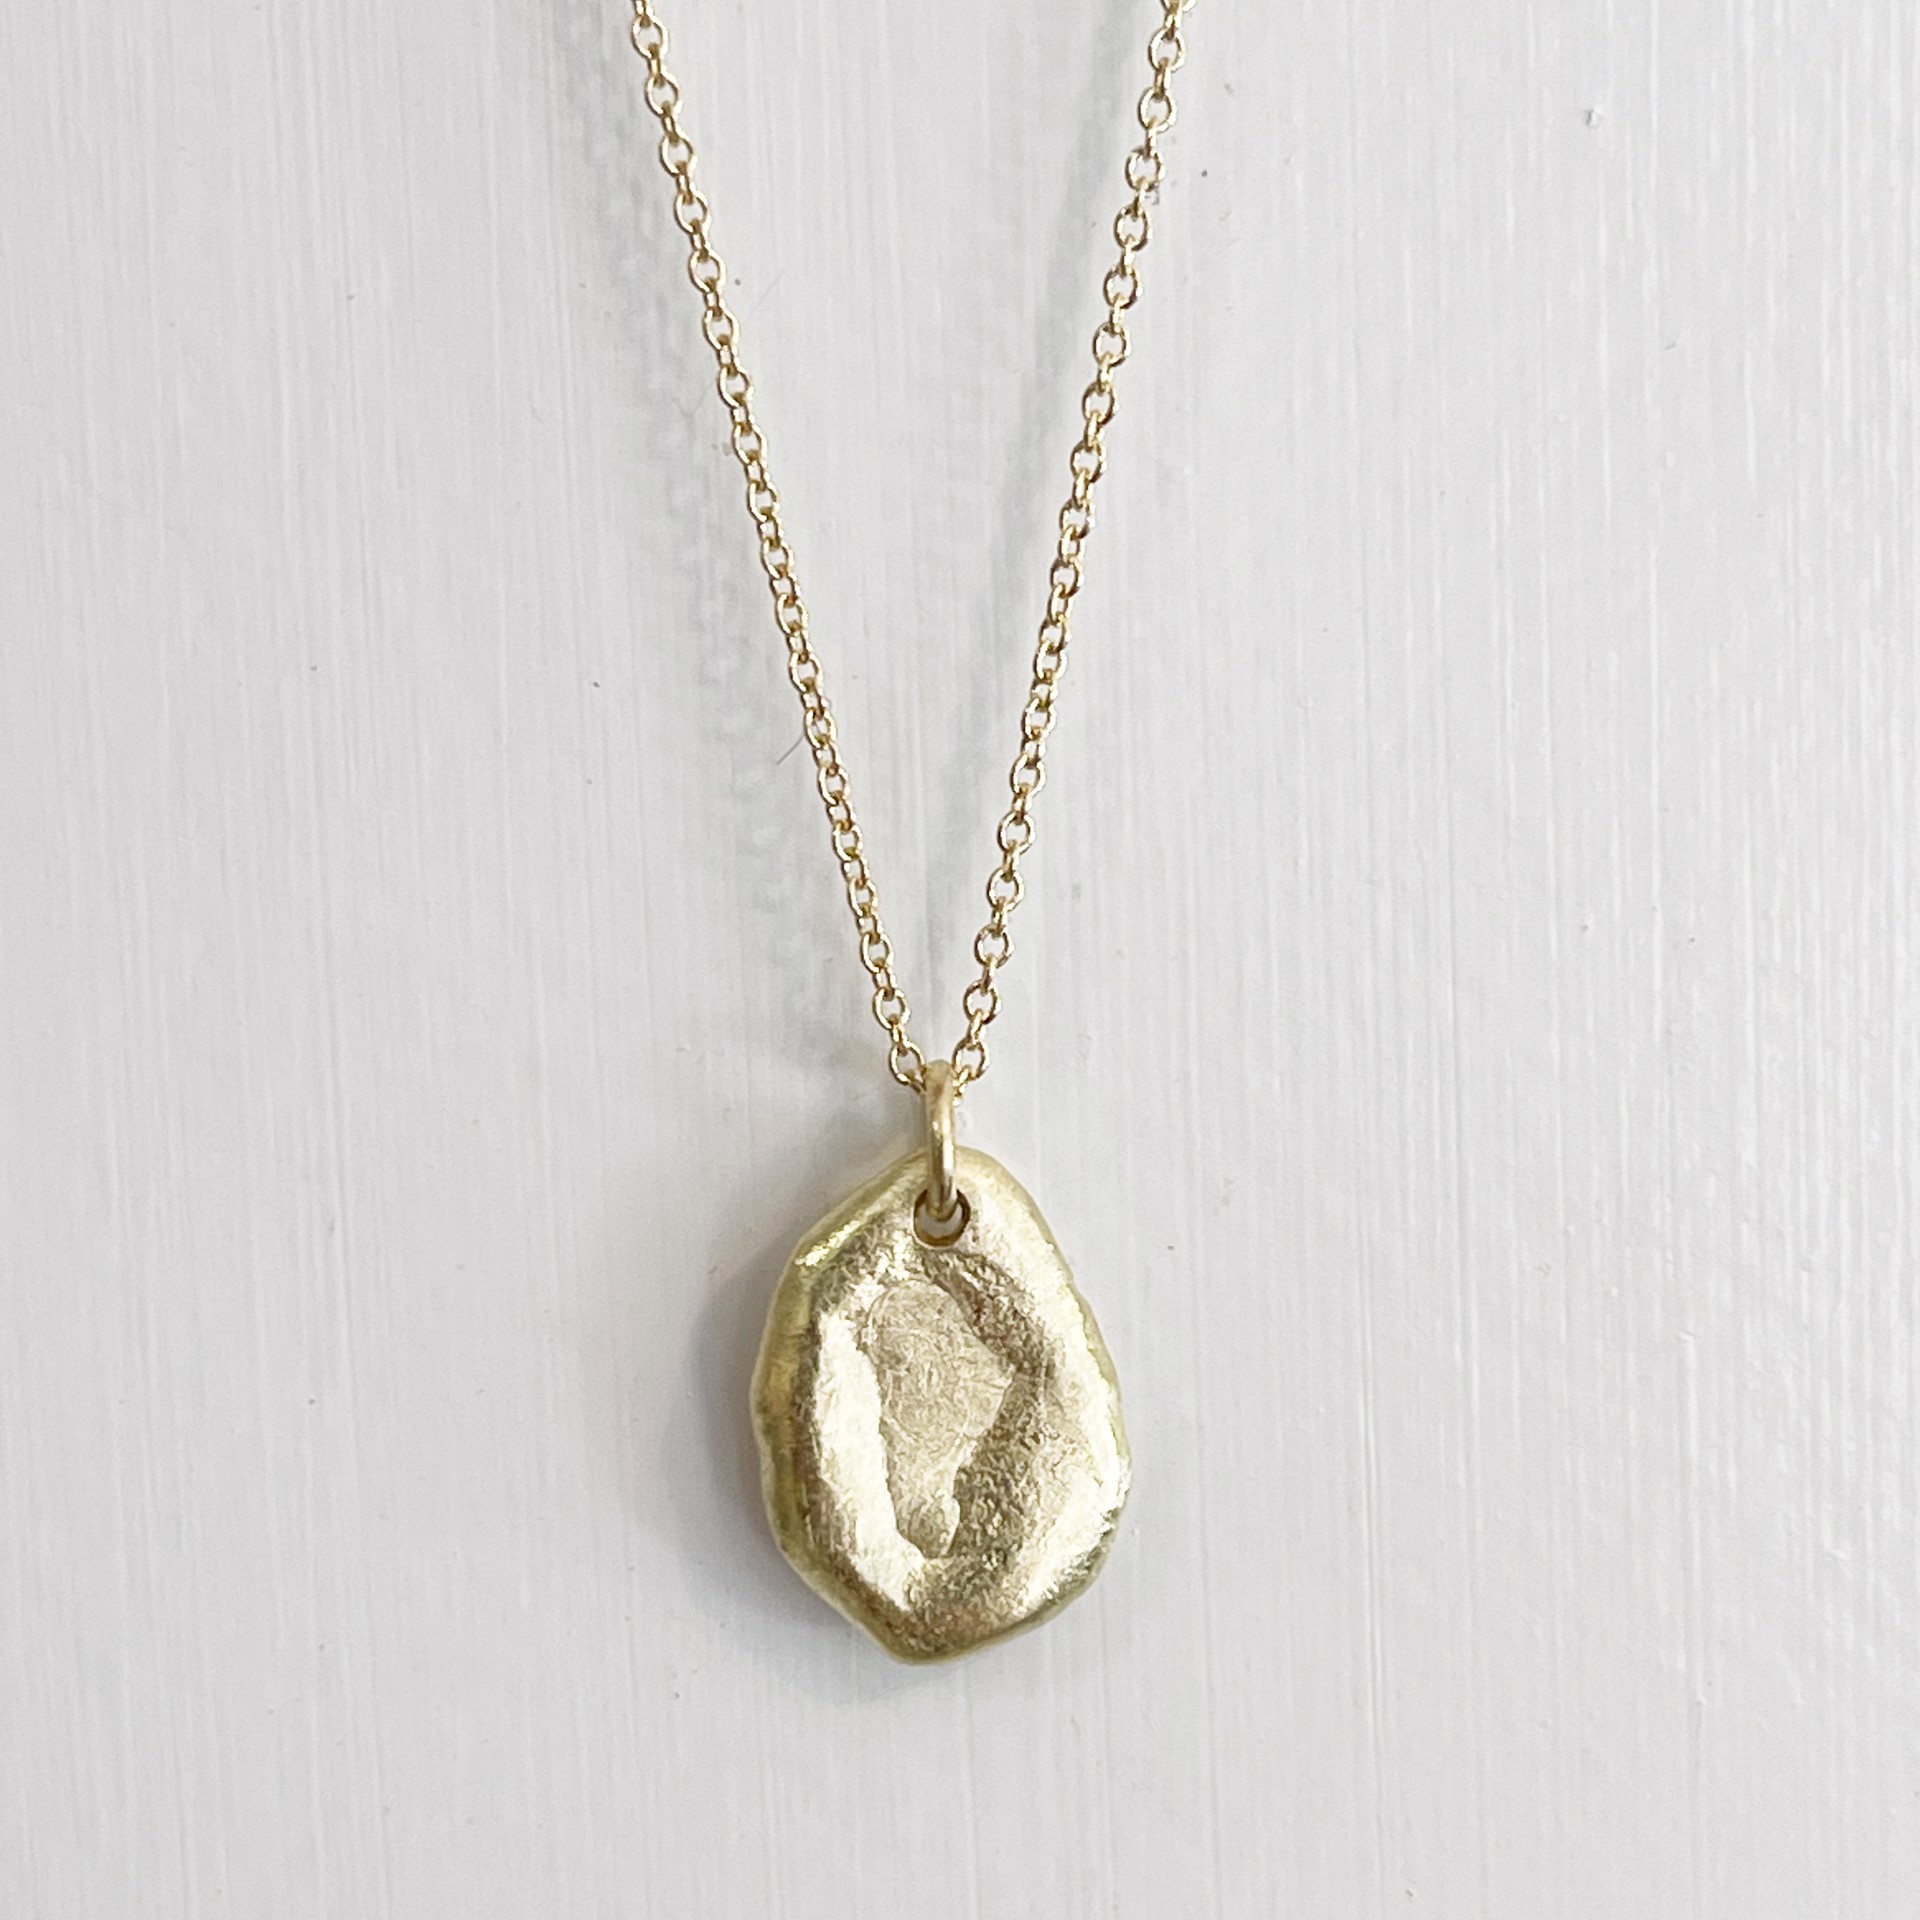 LHN20- Melted Teardrop Pendant on Cable Chain 18" 18k Gold by Leandra Hill